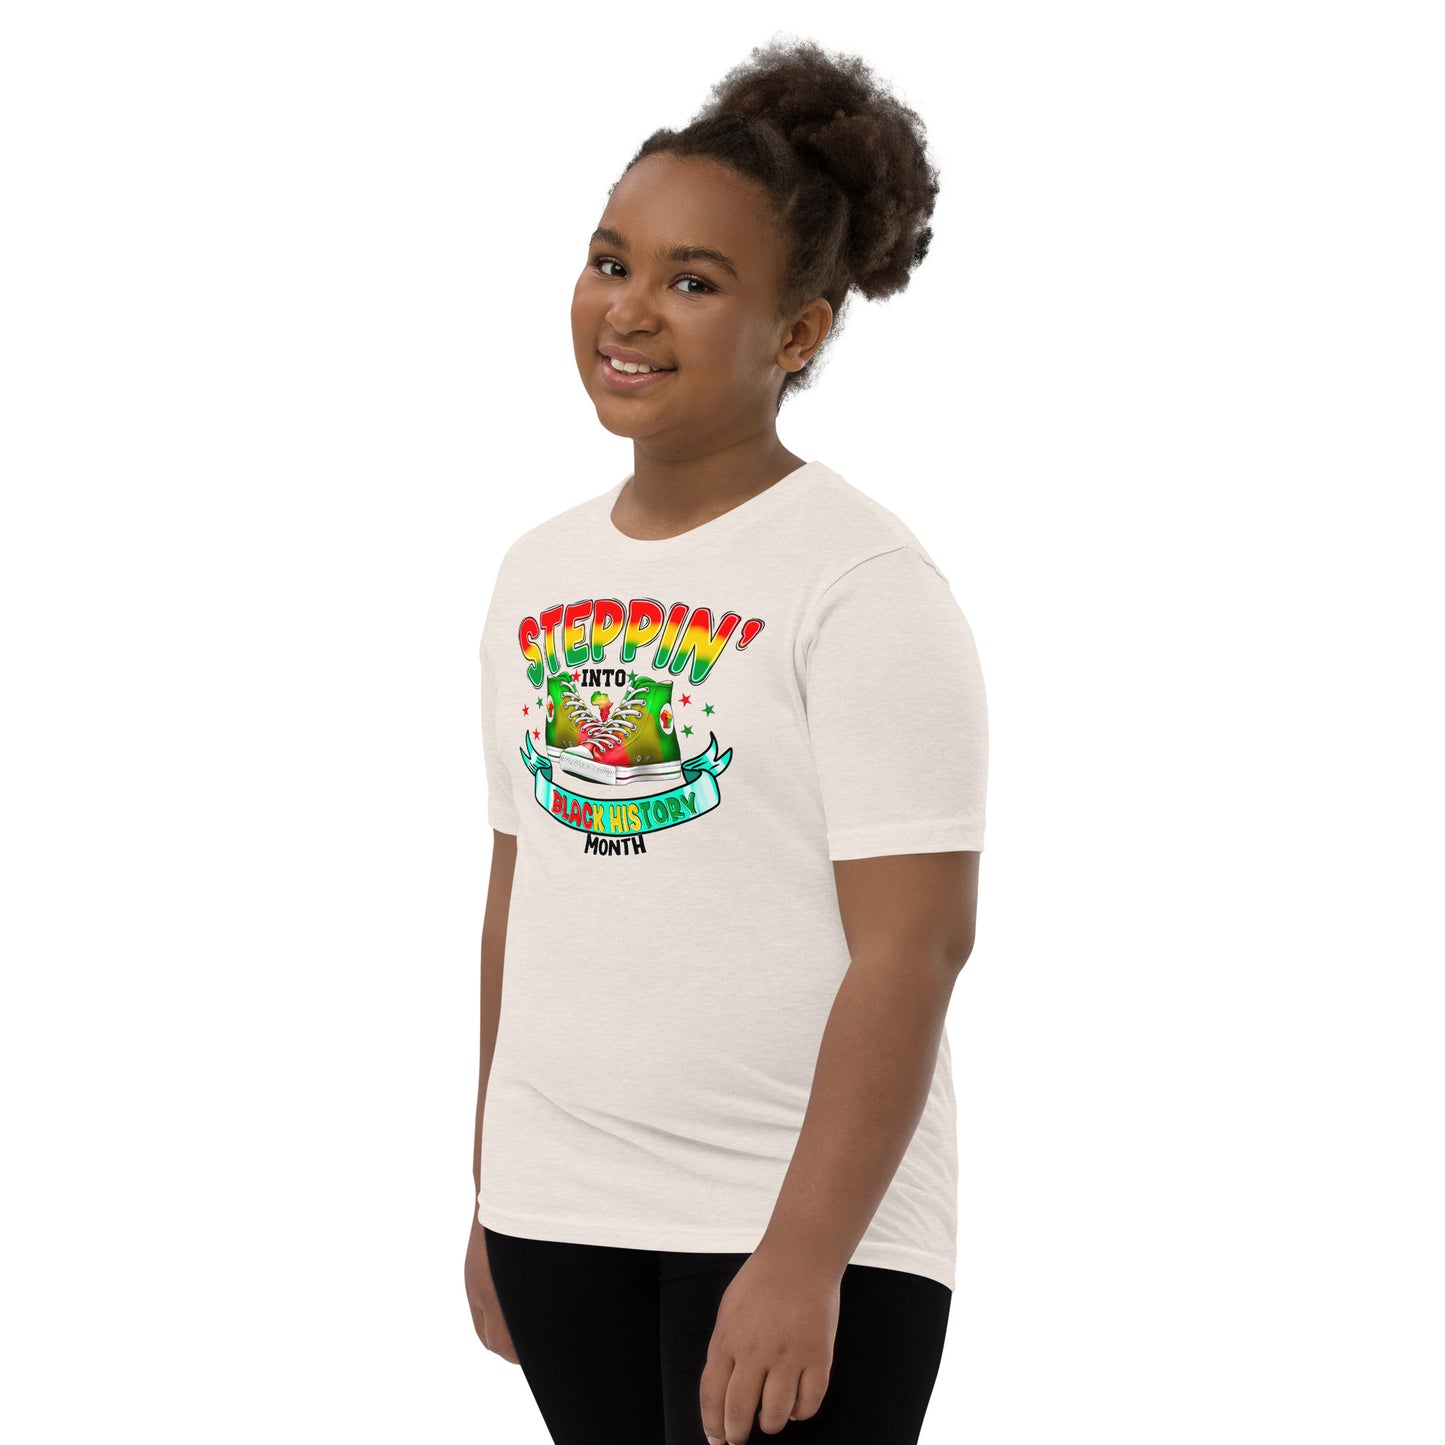 Youth Short Sleeve T-Shirt- Steppin Into Black History Month